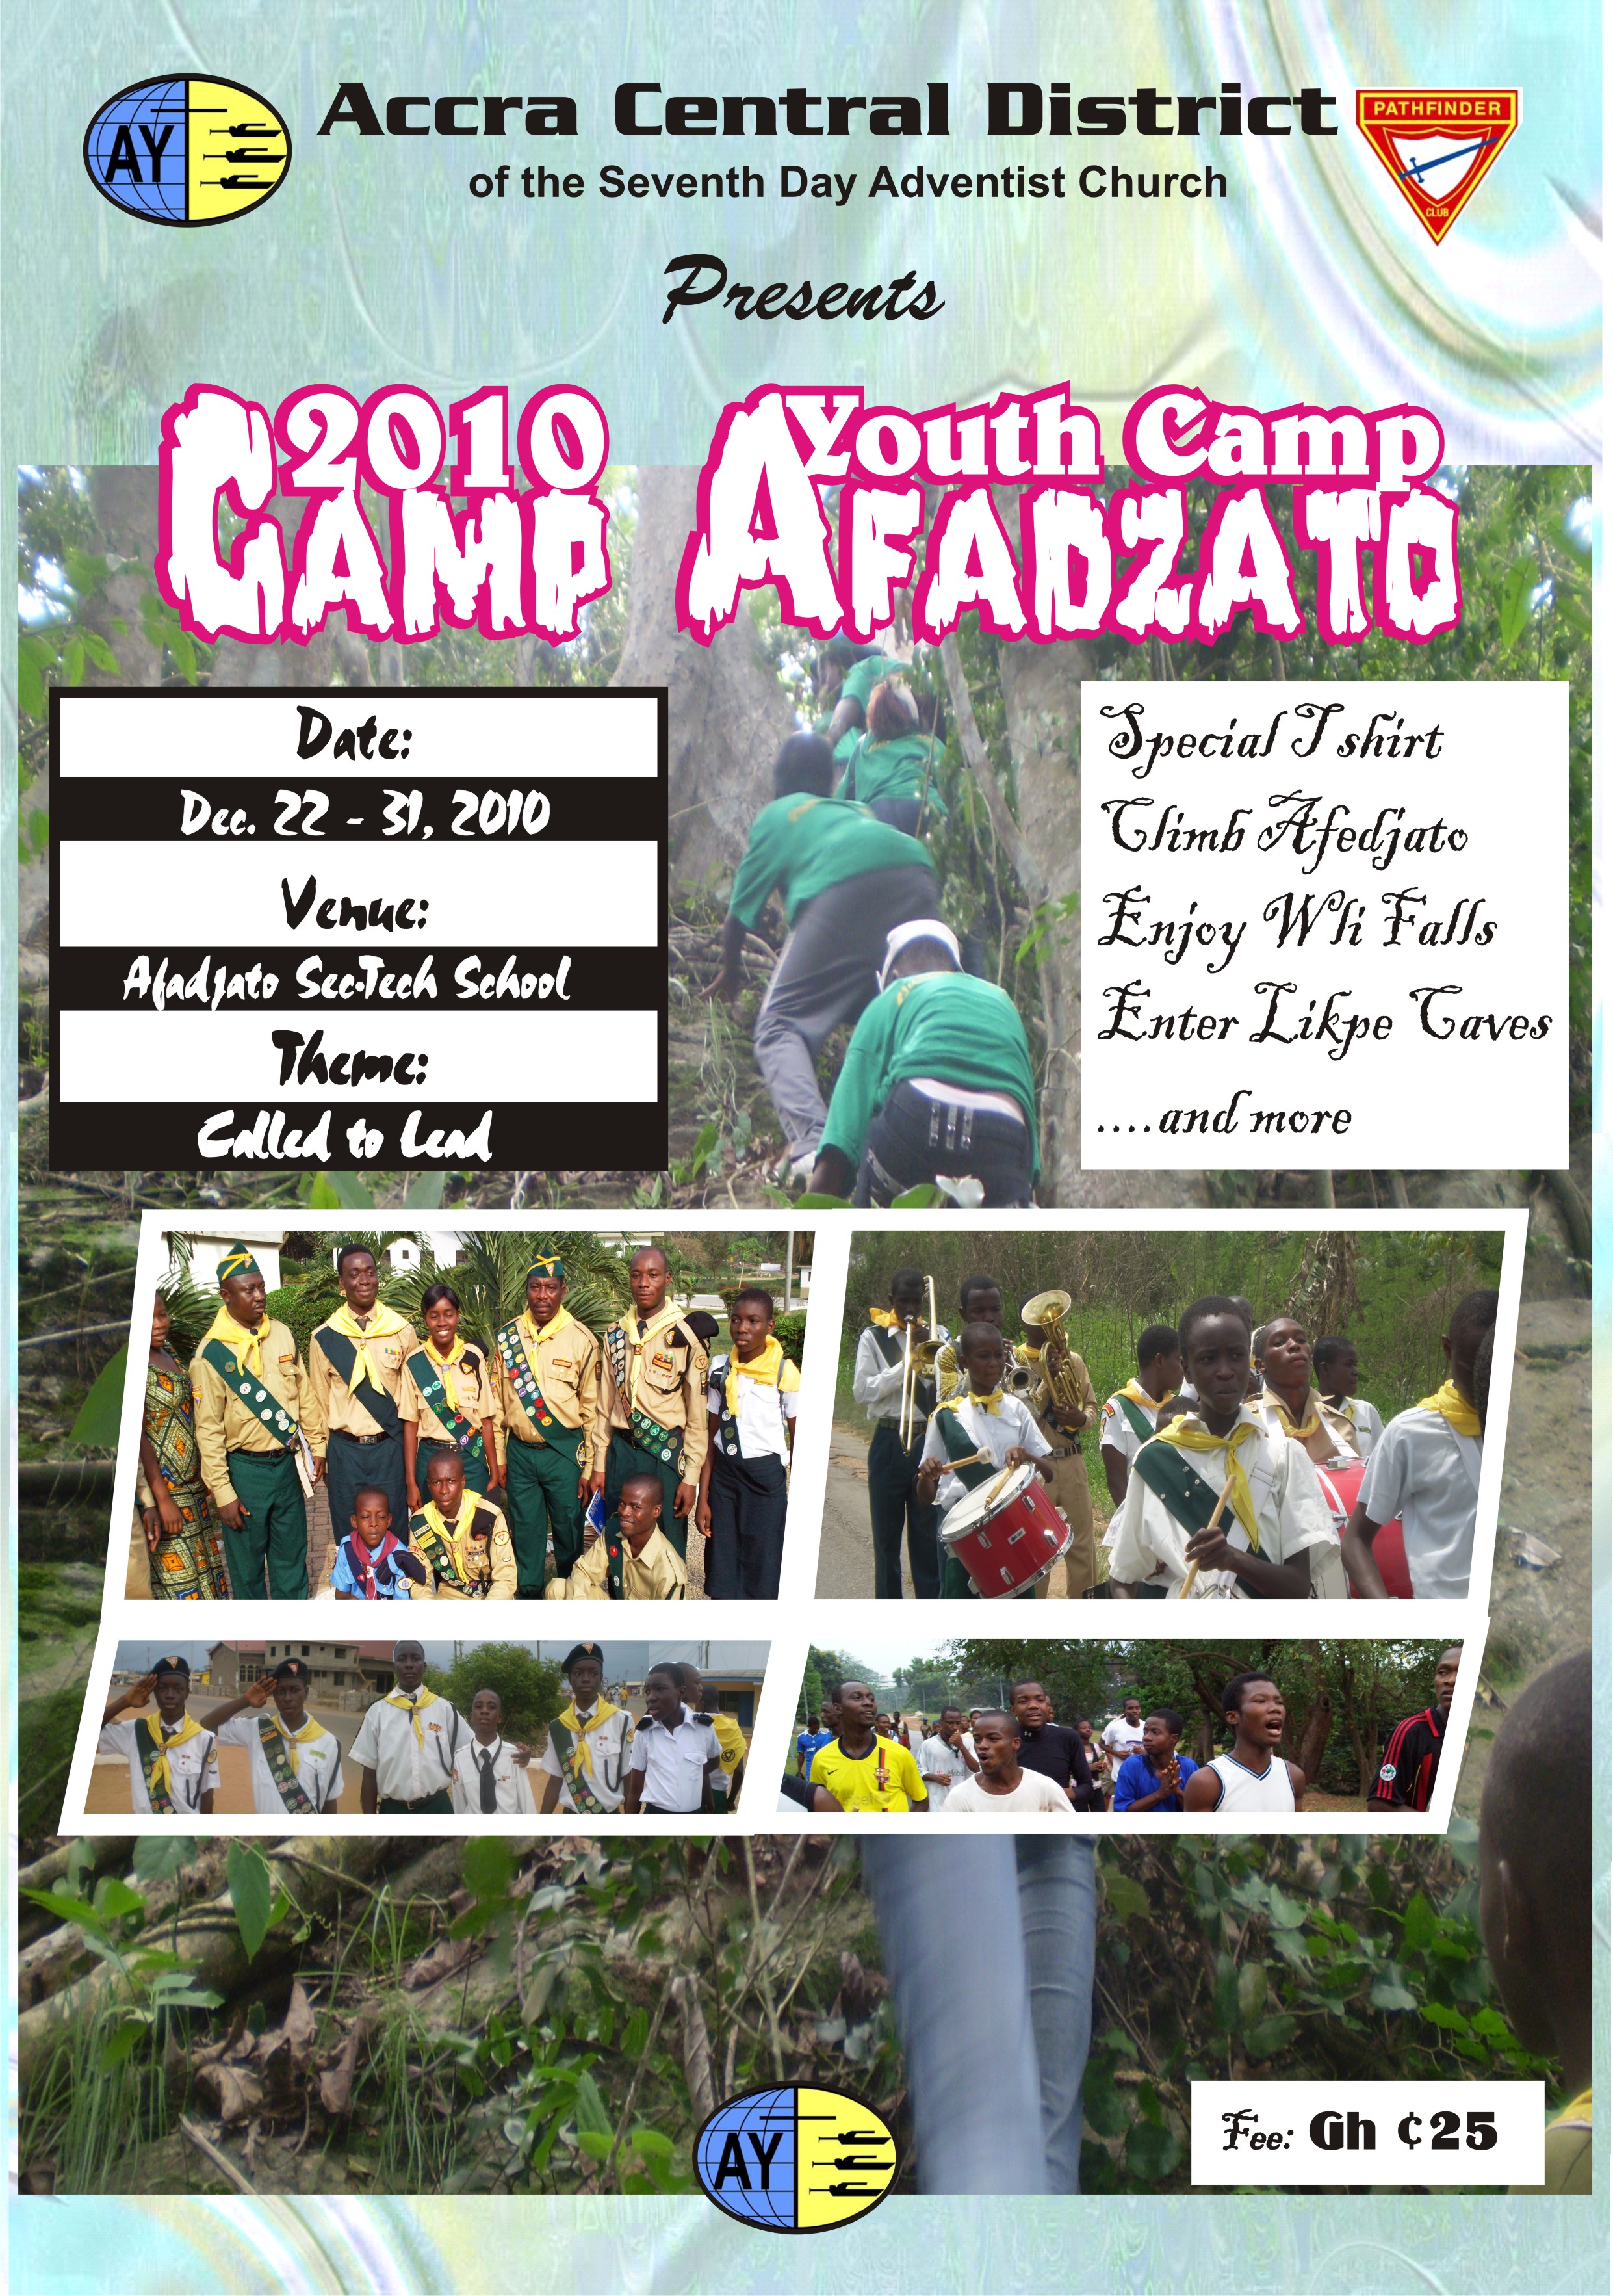 Youth camp 2010